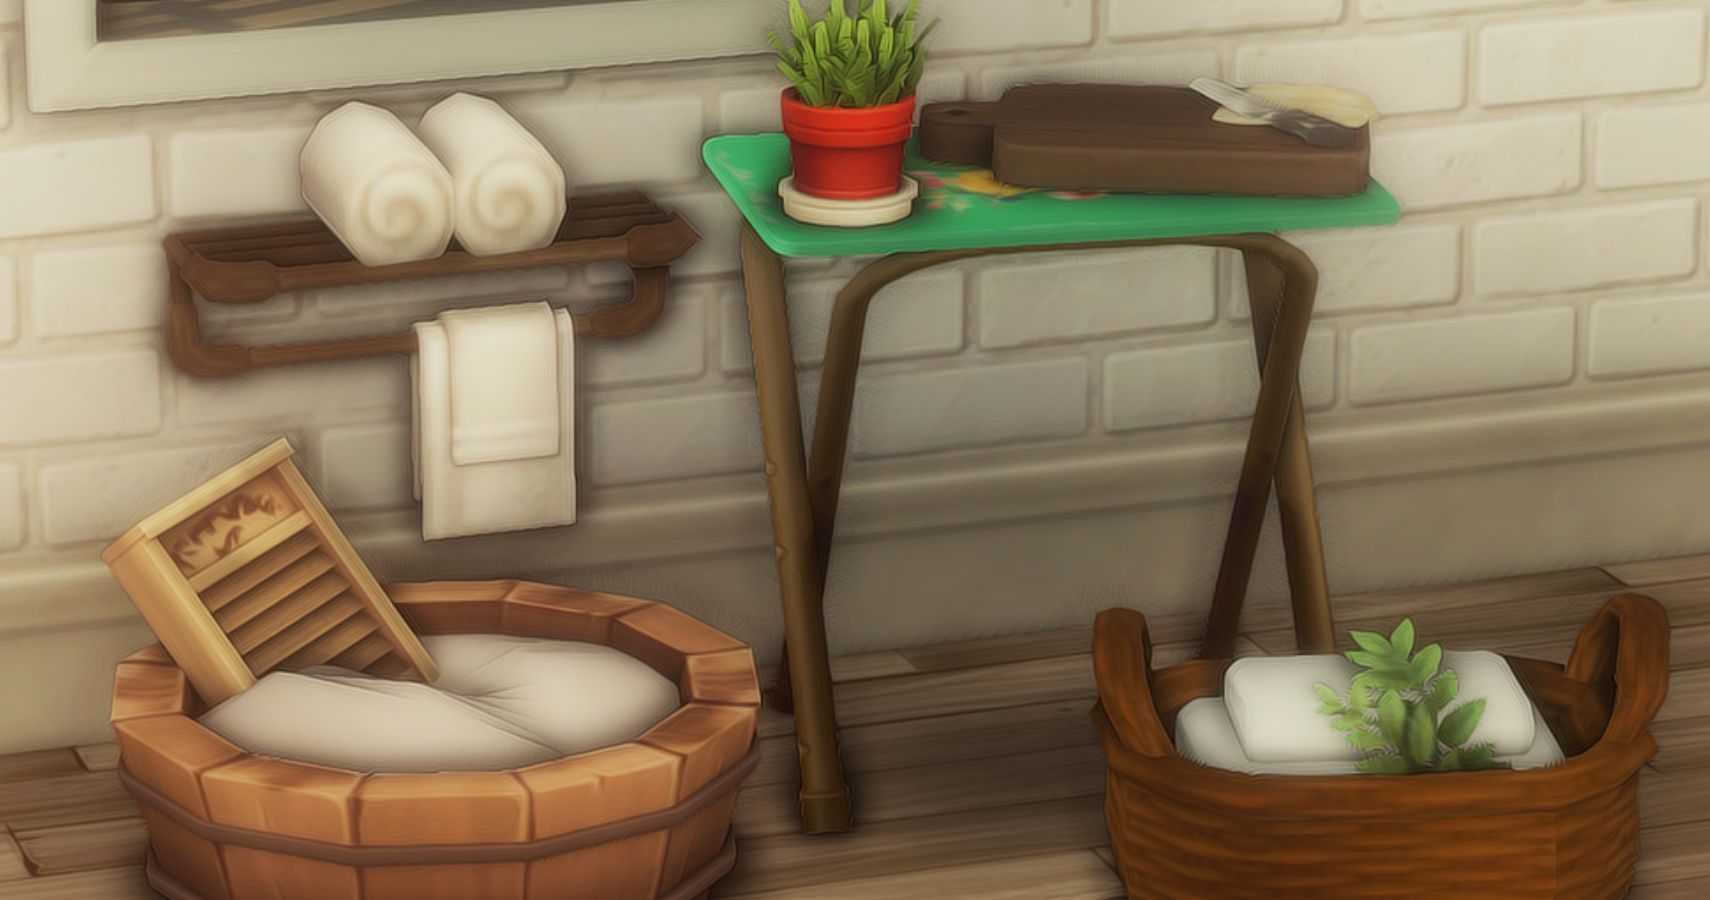 Several clutter items in a room including choppingboard and baskets.